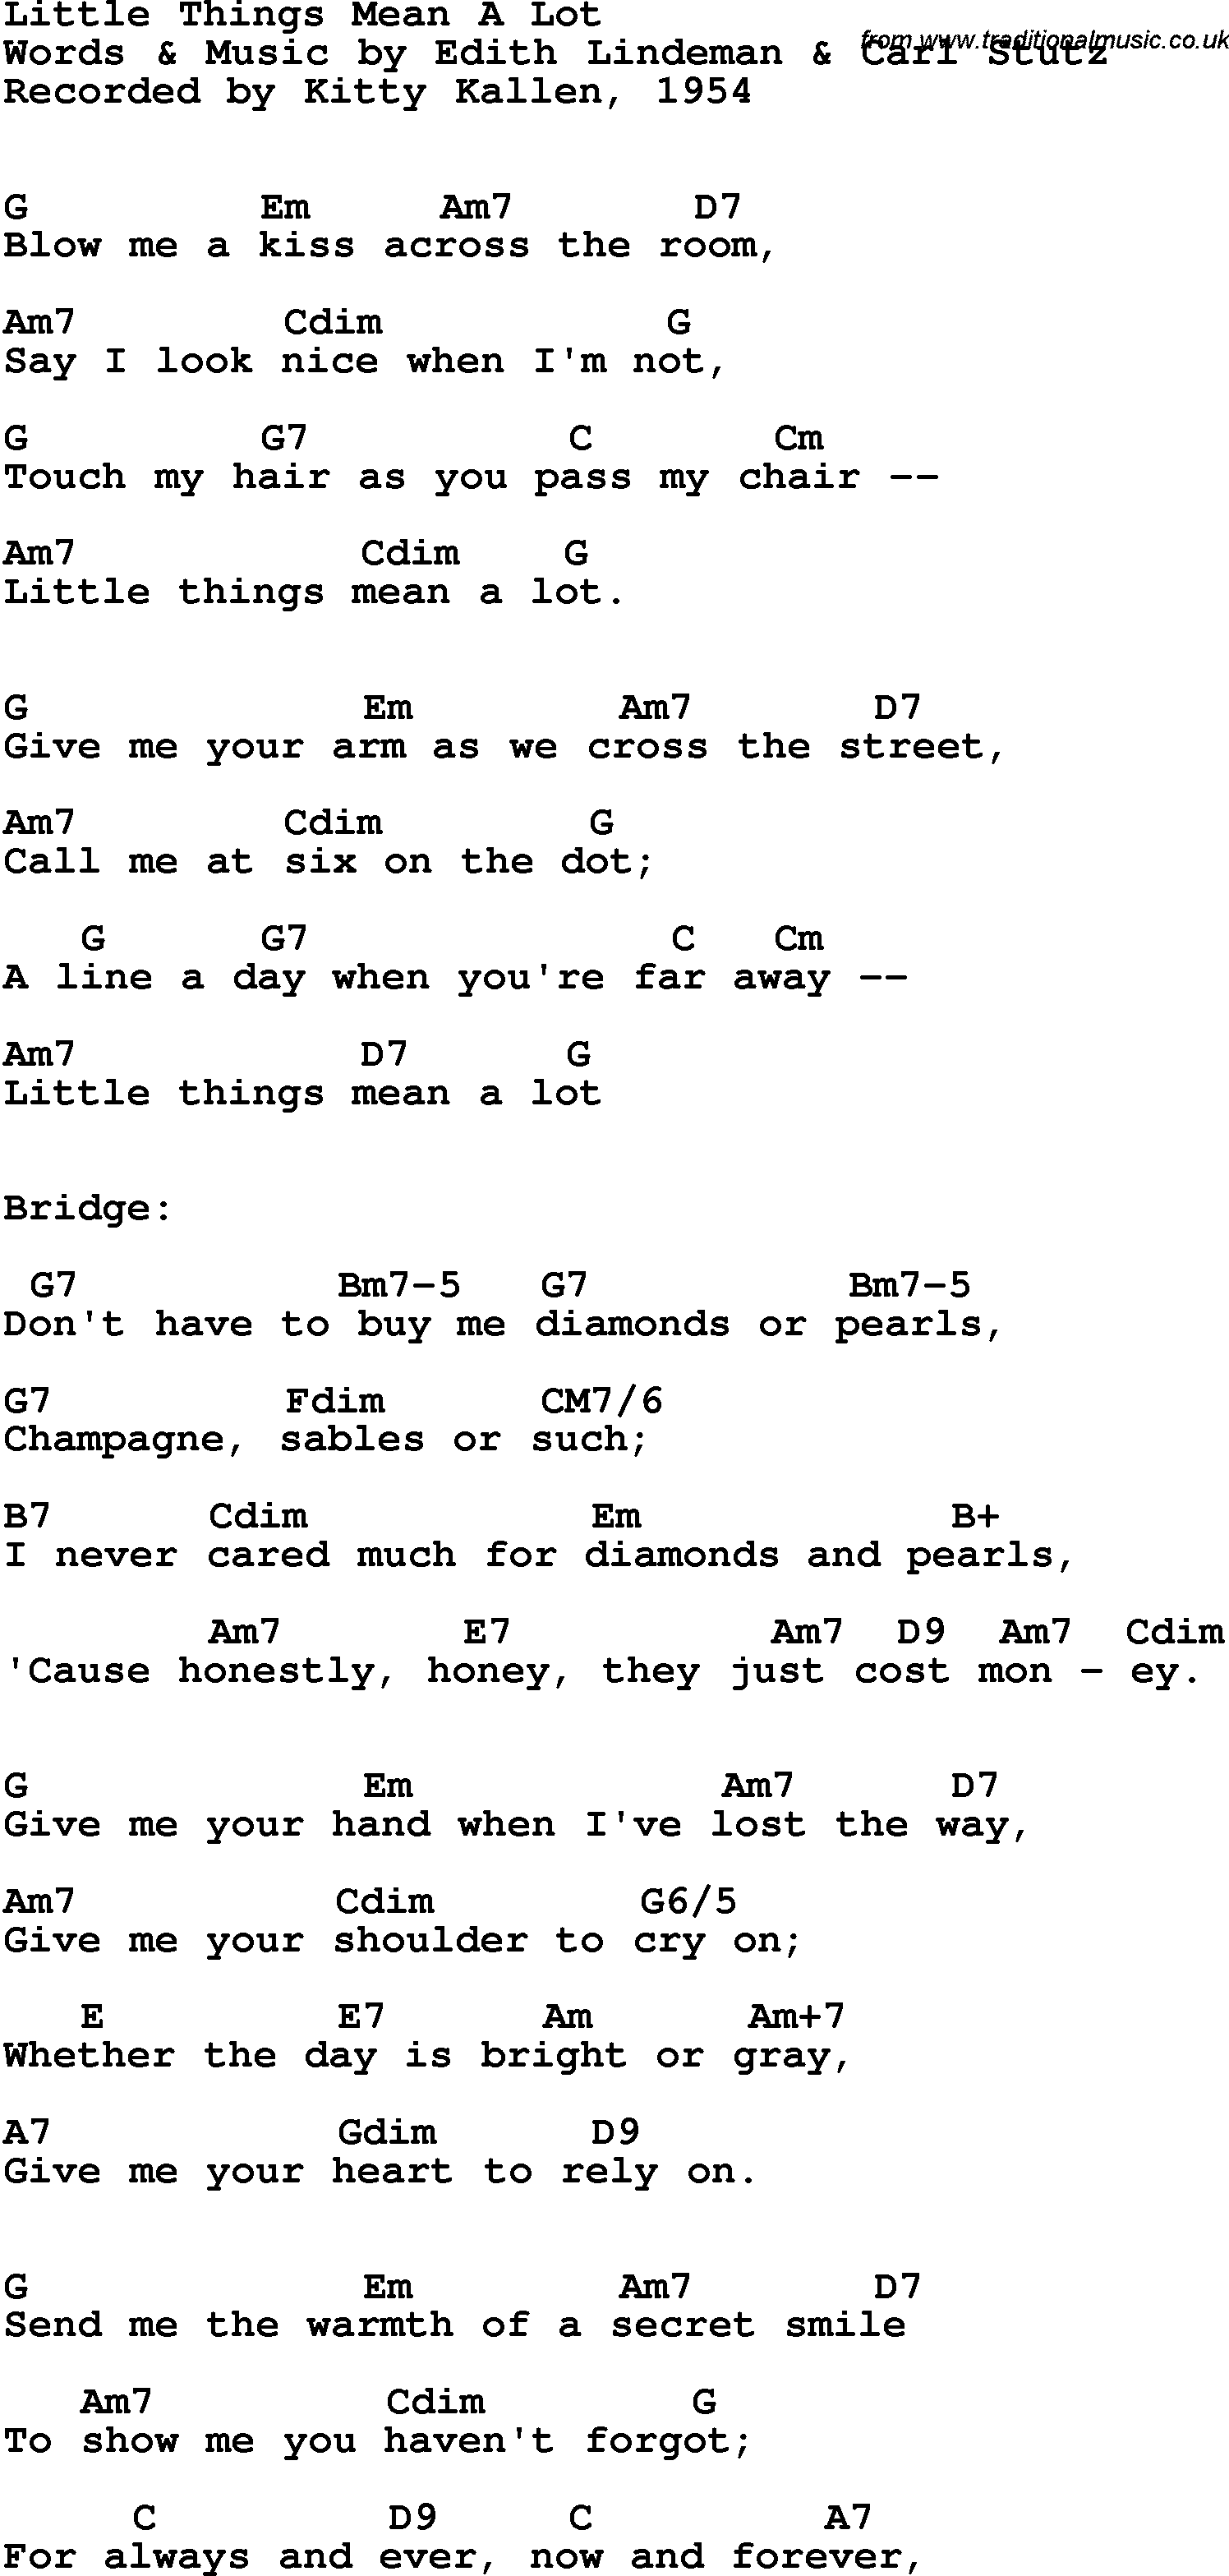 Song Lyrics With Guitar Chords For Little Things Mean A Lot Kitty Kallen 1954 G so this is what you meant when you said that you were spent? traditional music library